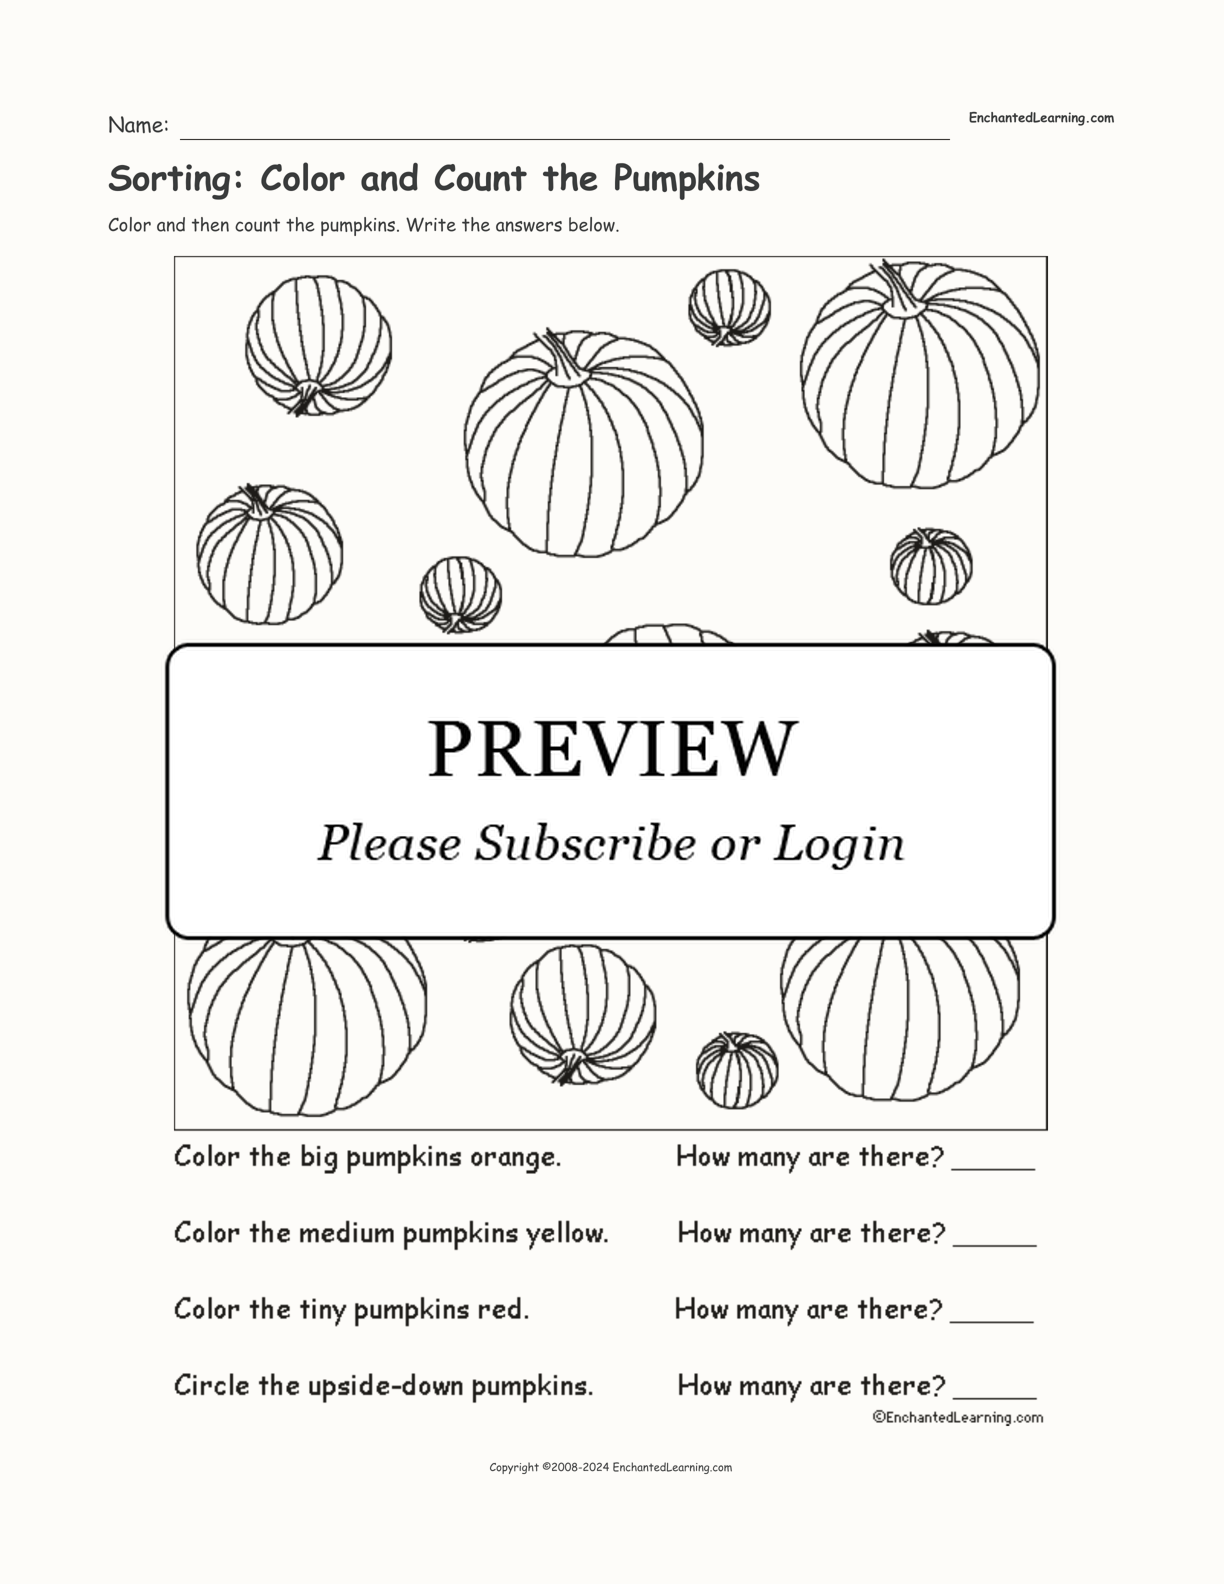 Sorting: Color and Count the Pumpkins interactive worksheet page 1